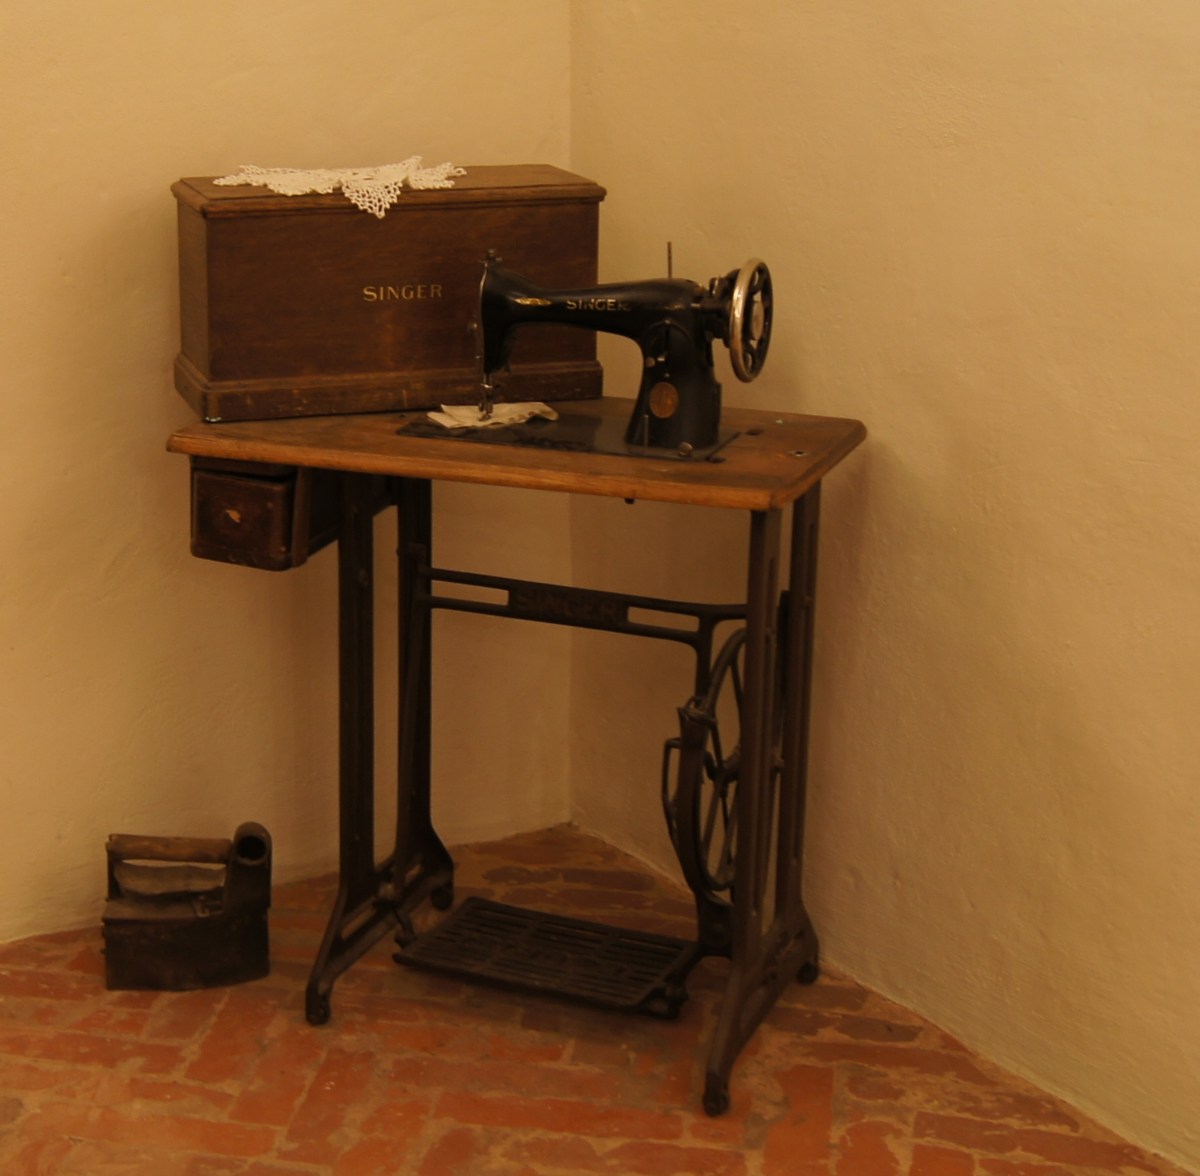 Singer sewing machine and an old coal iron. Alatskivi castle.